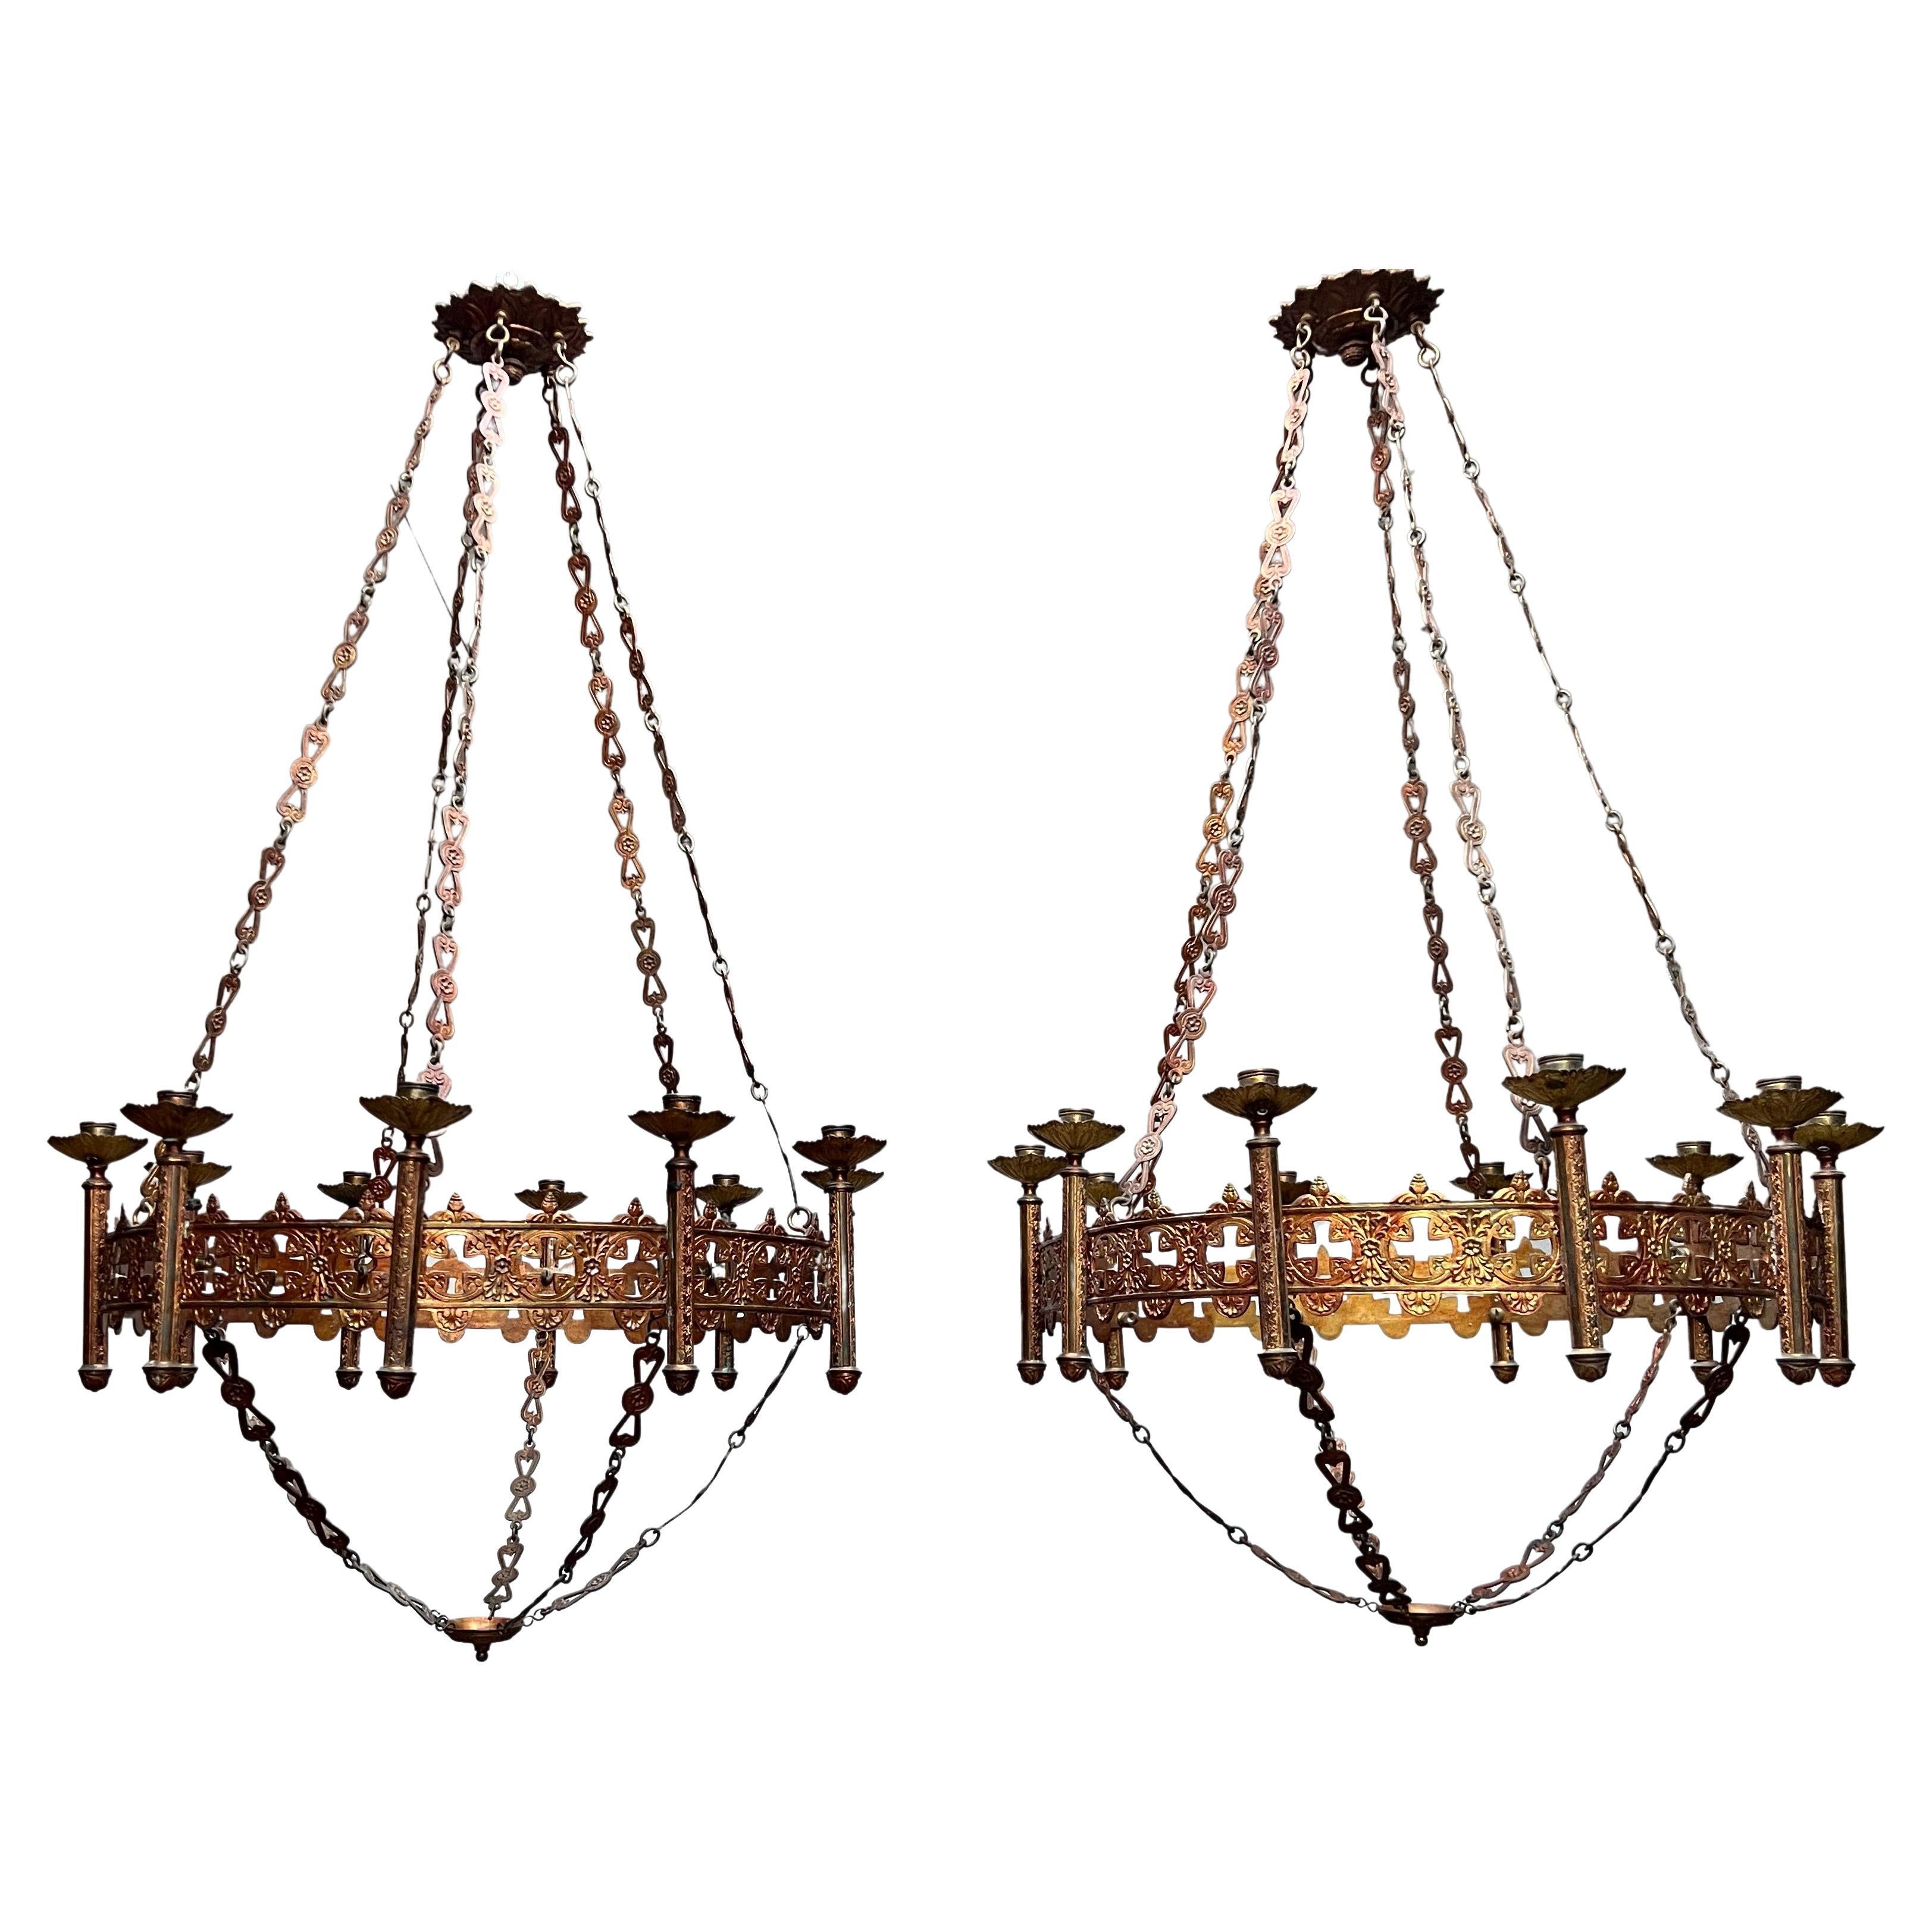 Rare & Large Pair of Gilt Bronze Gothic Revival Advent Wreath Candle Chandeliers